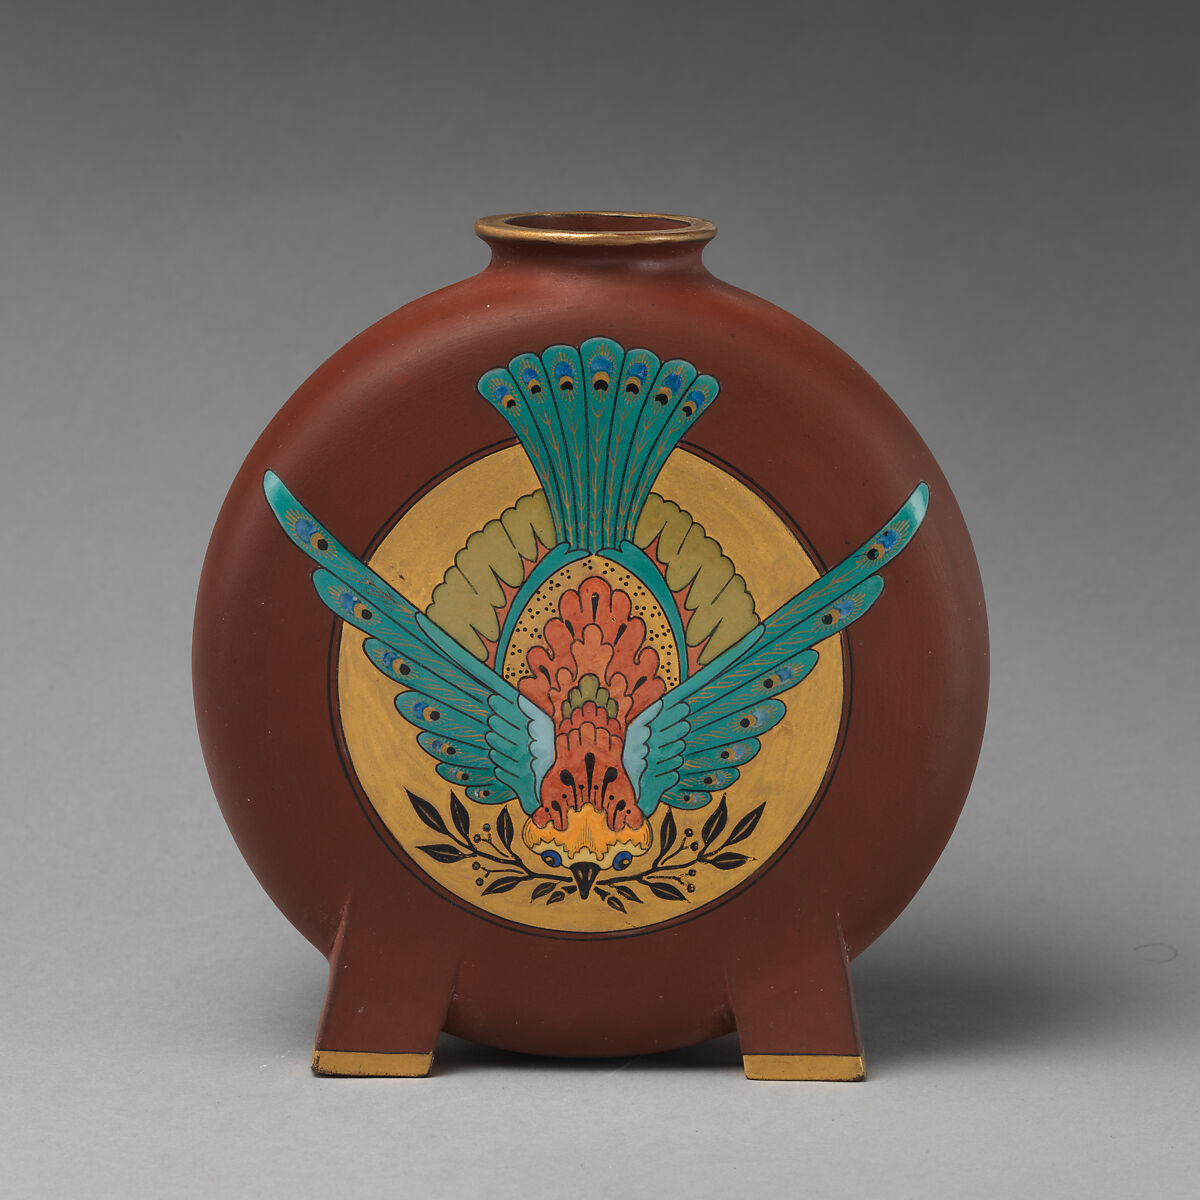 Moon flask with Aesthetic bird motif, Minton(s) (British, Stoke-on-Trent, 1793–present), Red stoneware, enamel, British, Stoke-on-Trent, Staffordshire 